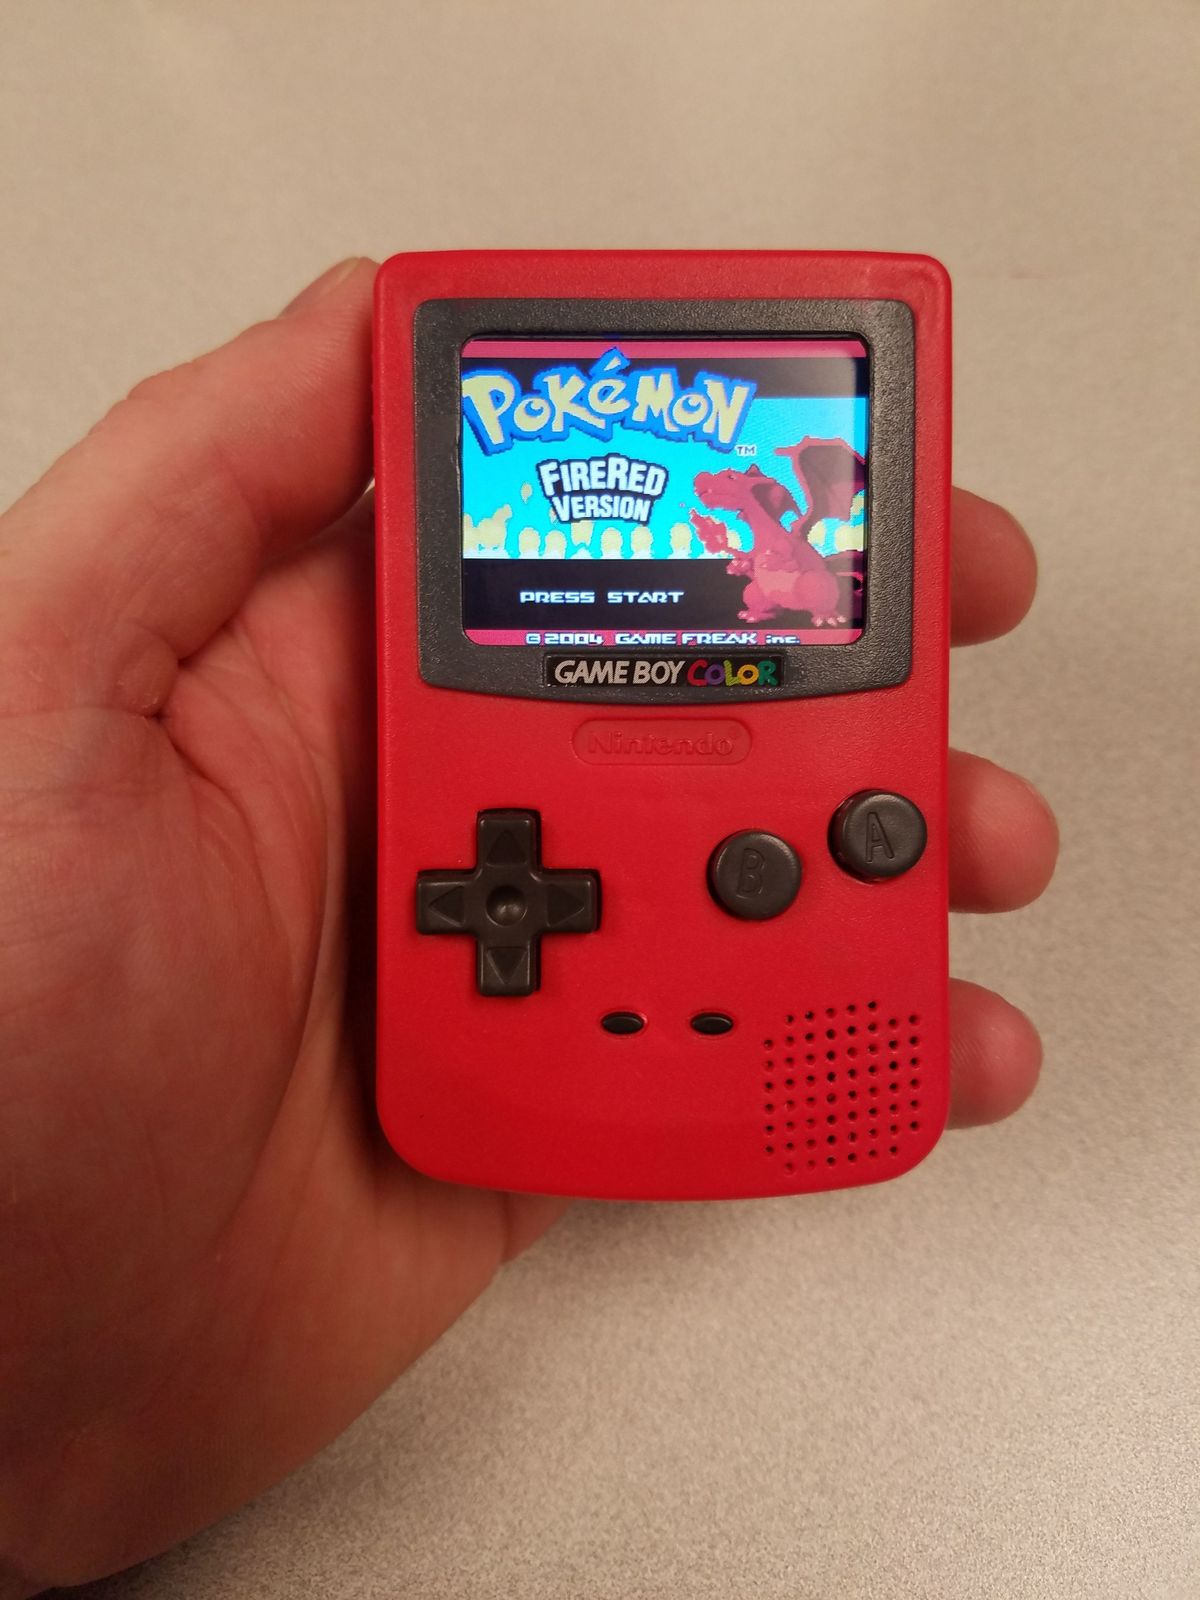 This tiny toy GameBoy is now a real GameBoy, kind of.